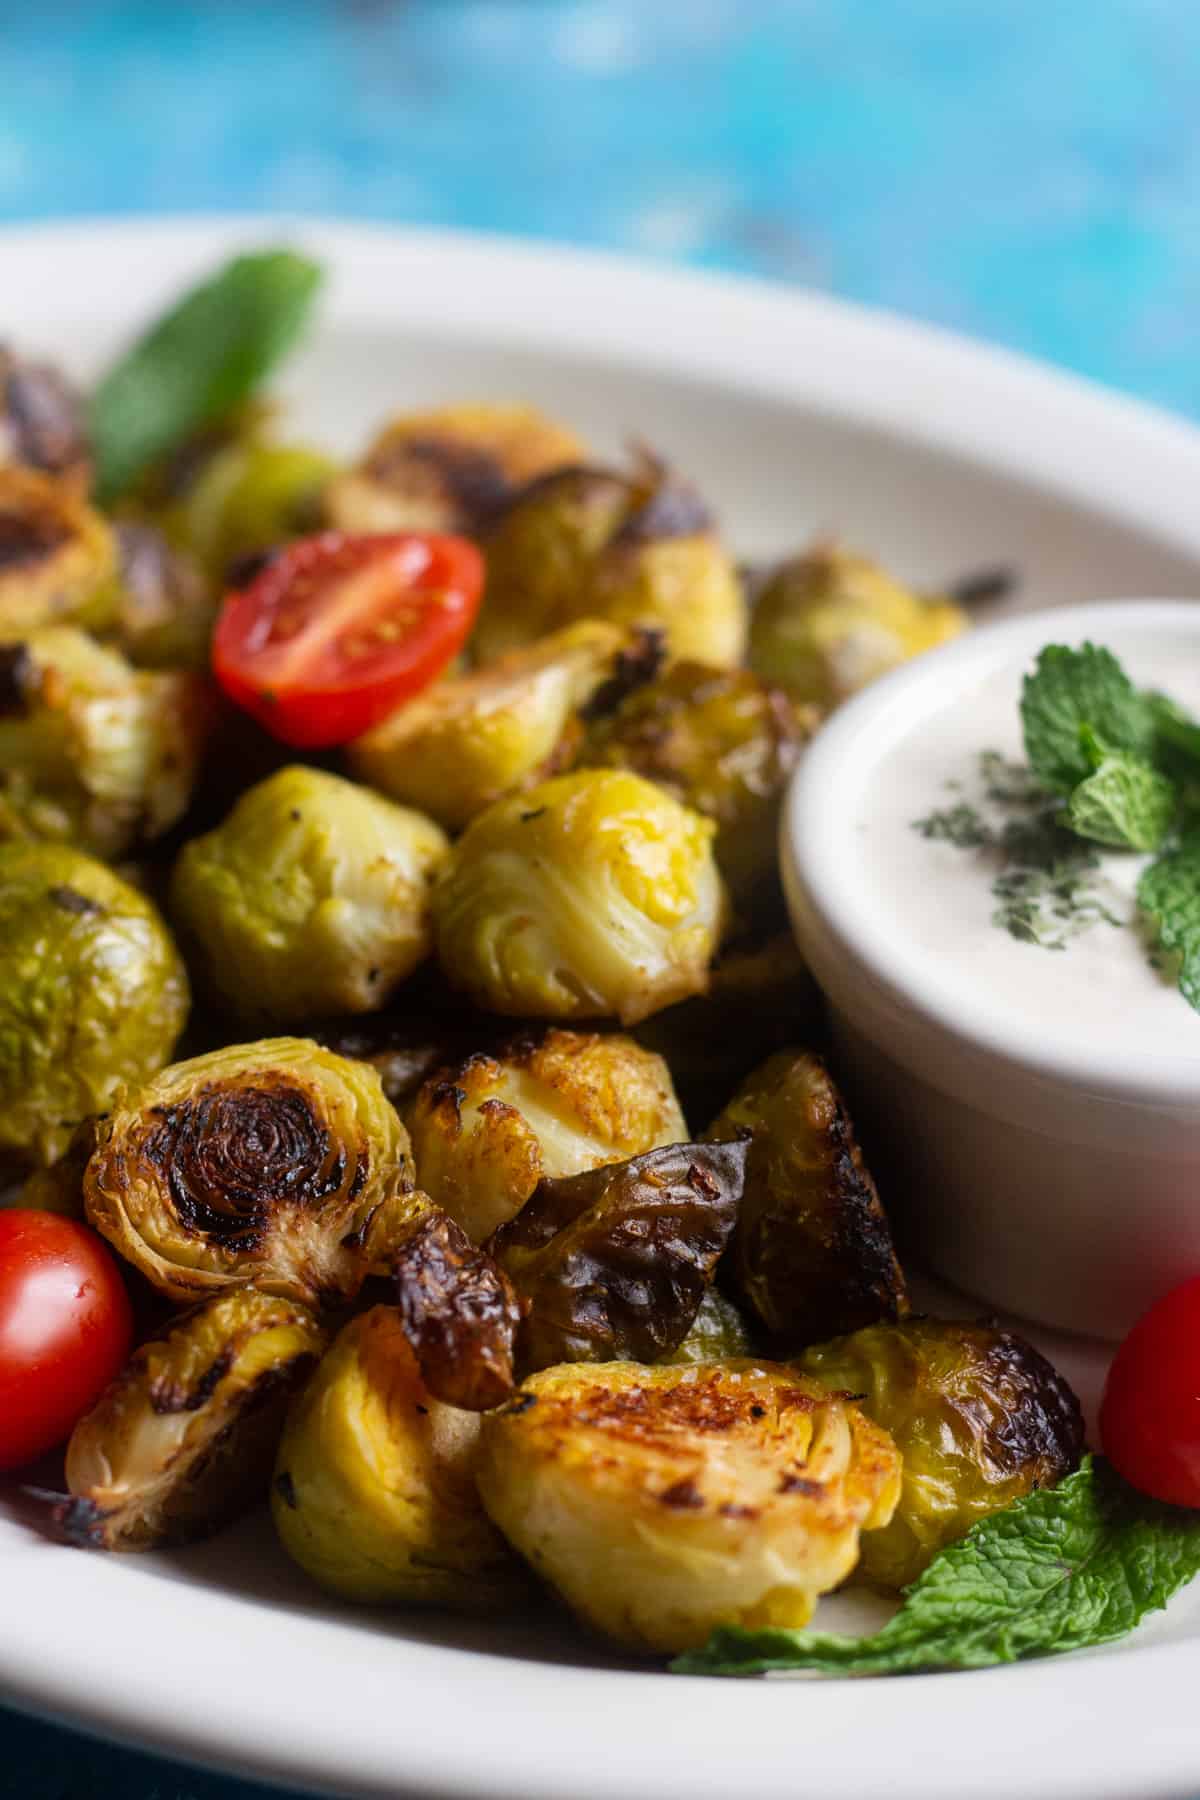 Oven roasted brussel sprouts are easy and ready in 20 minutes. Crispy brussel sprouts roasted in the oven with lemon and garlic make a great side dish. 
